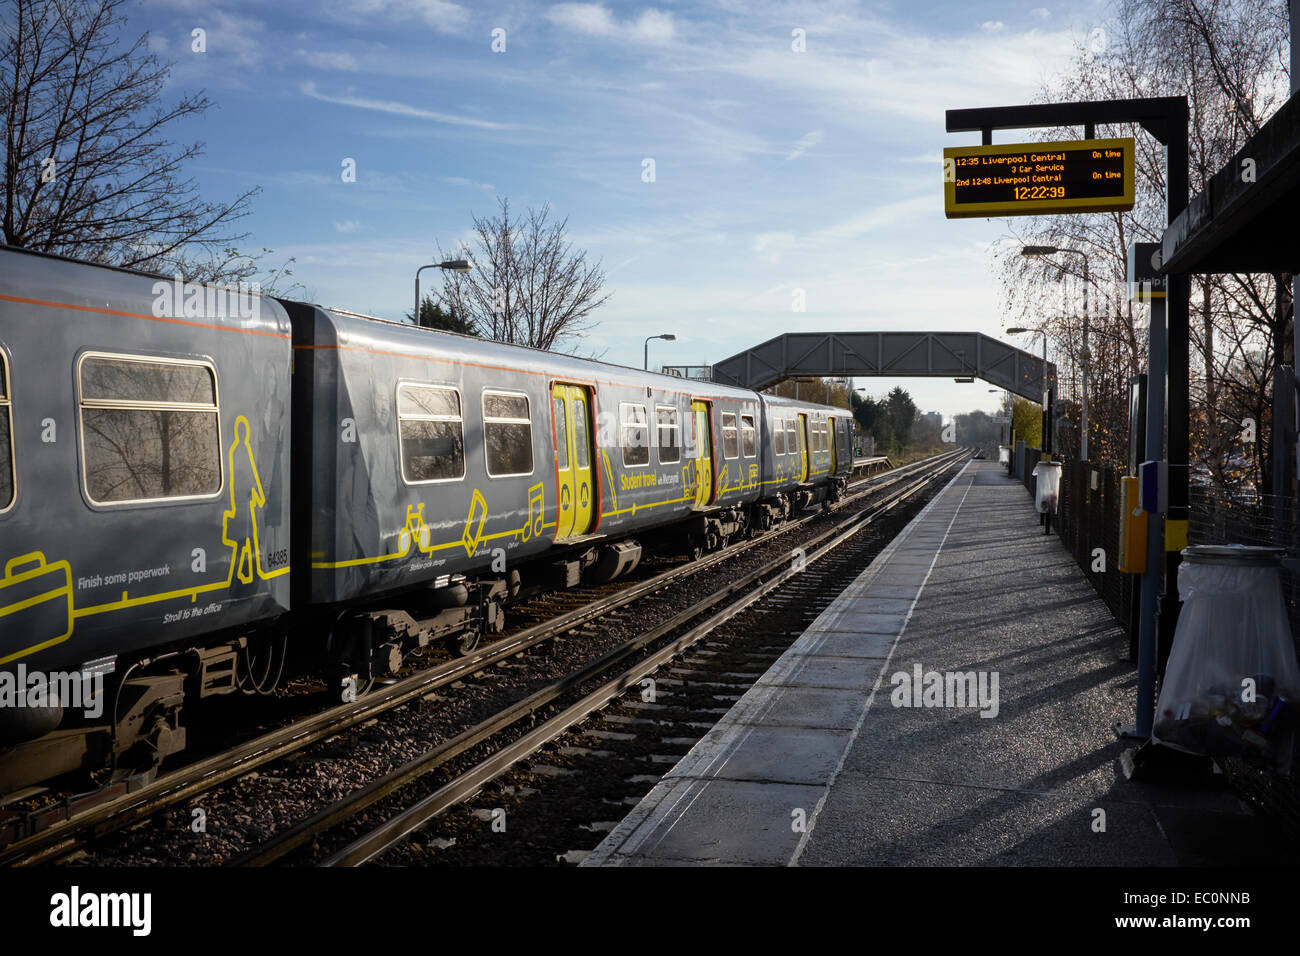 A Wirral Line Merseyrail train at Bache Station travelling from Liverpool to Chester Stock Photo